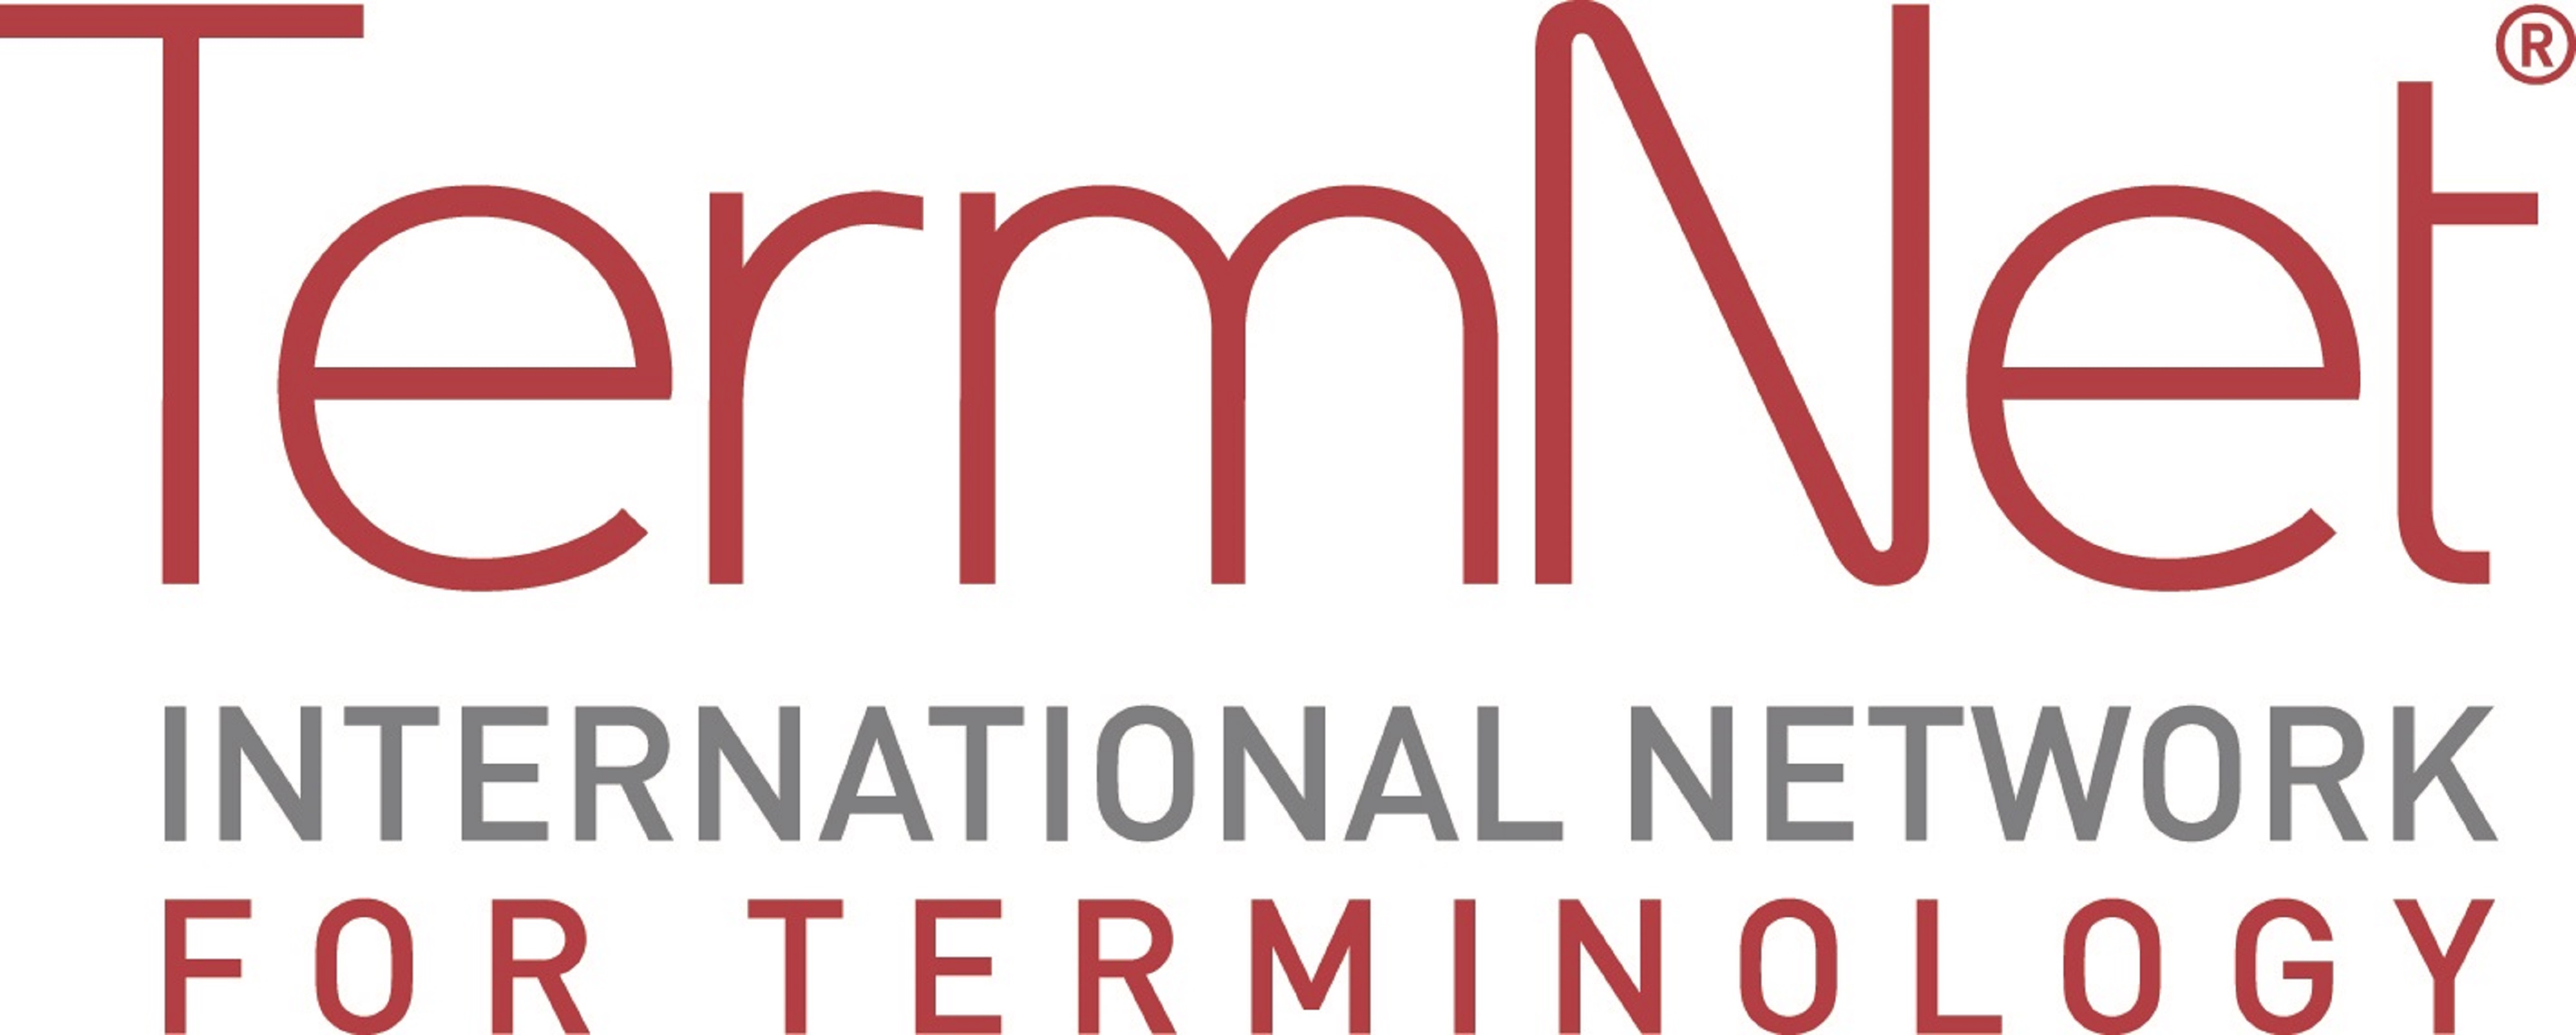 Logo of the International Network for Terminology (TermNet)